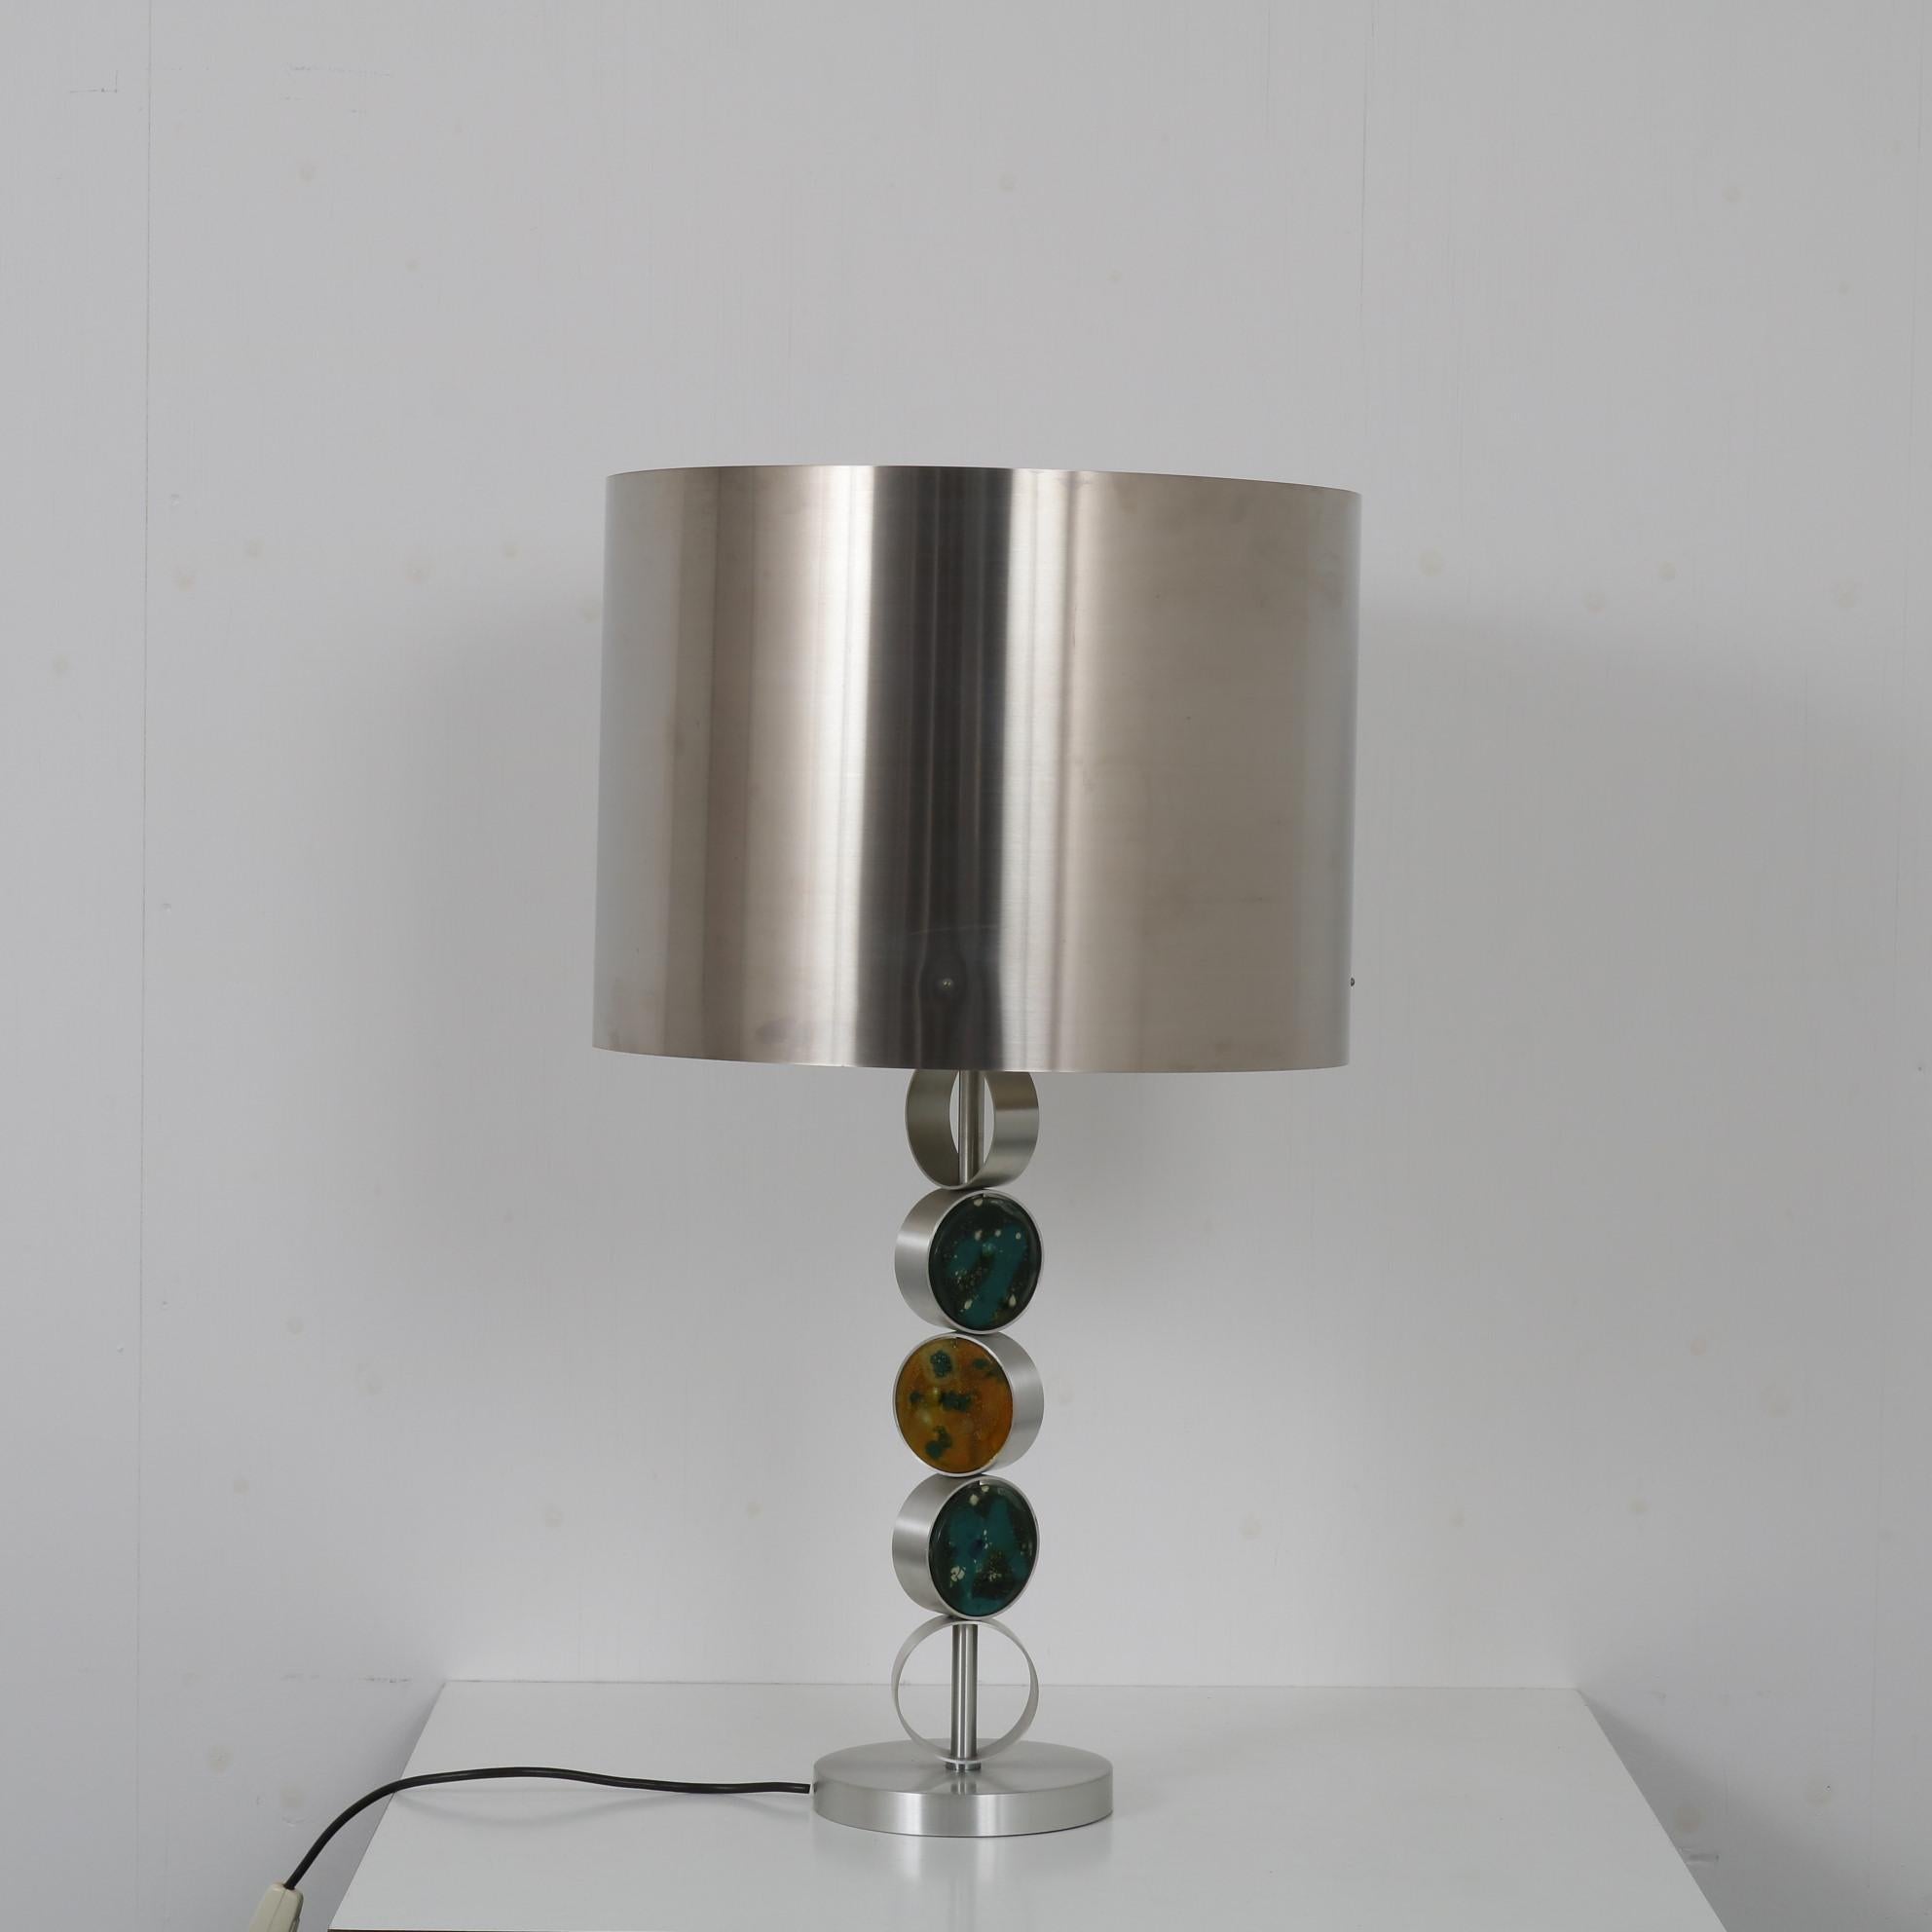 Late 17th Century Chrome with Glass Table Lamp by Nanny Still for Raak, Netherlands, 1970 For Sale